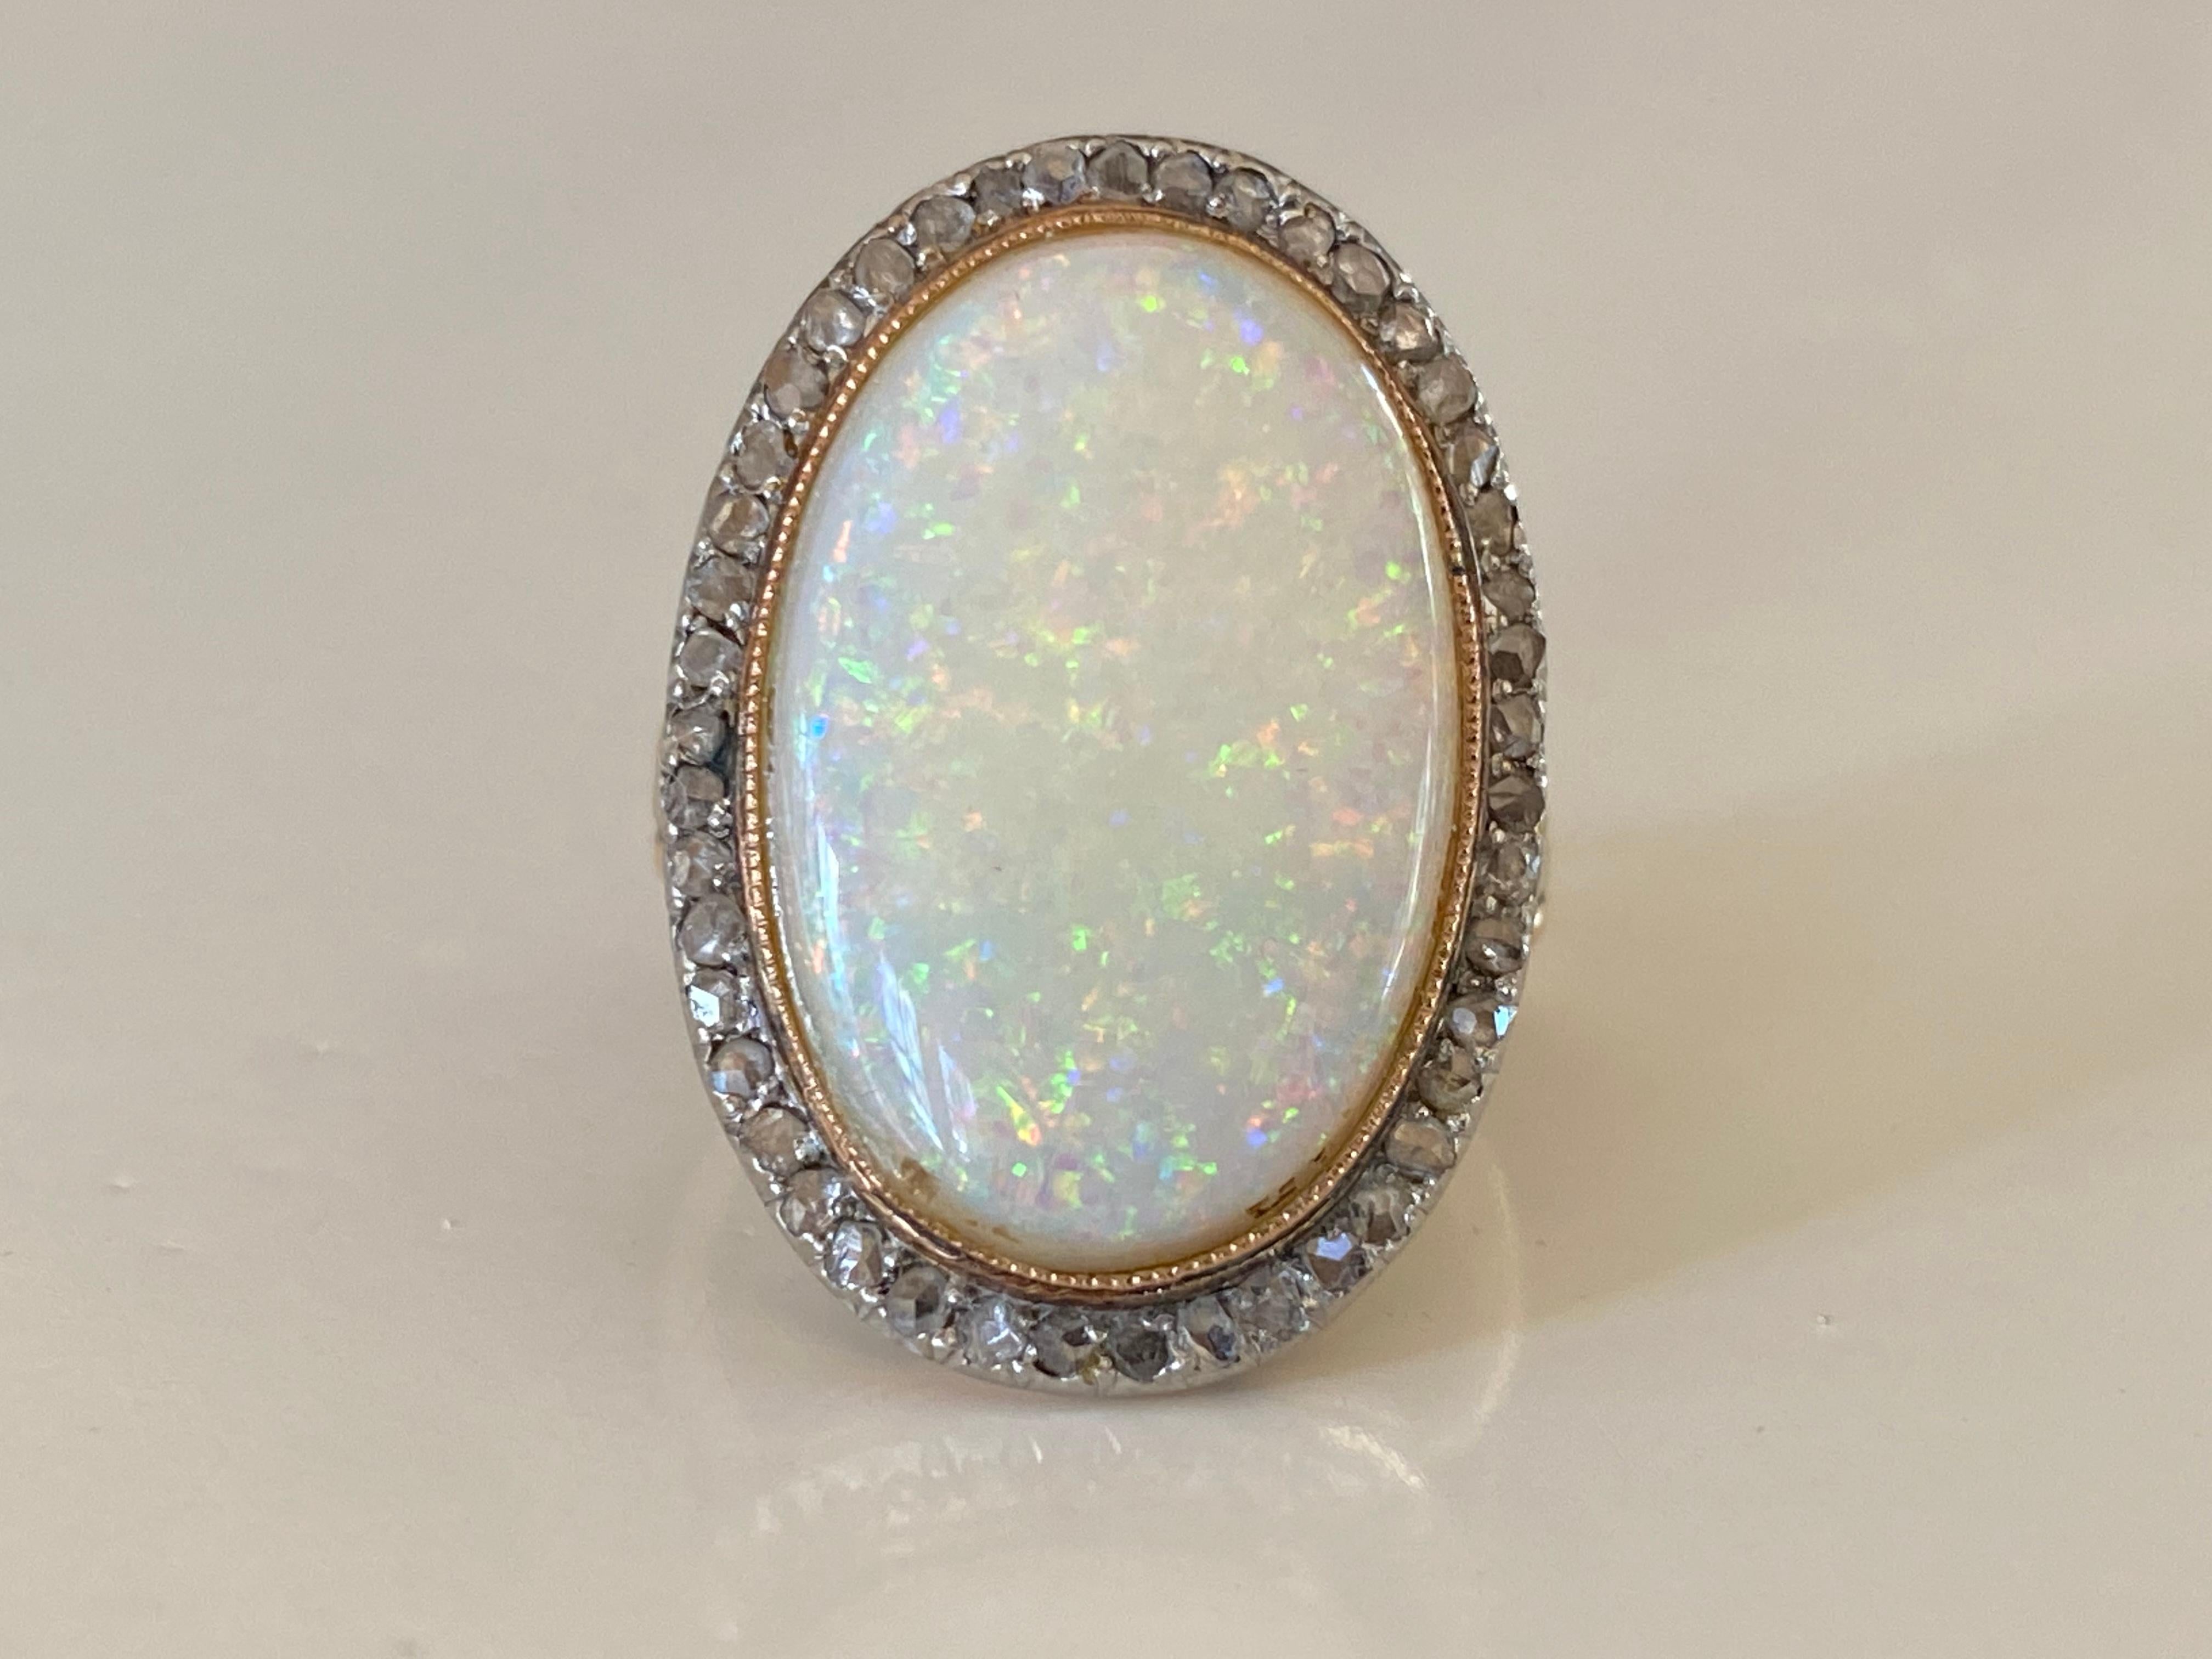 Crafted in the 1930s in 18kt yellow gold and platinum, this two-tone vintage cocktail ring features a natural oval-shaped Australian opal cabochon with a multi-color 